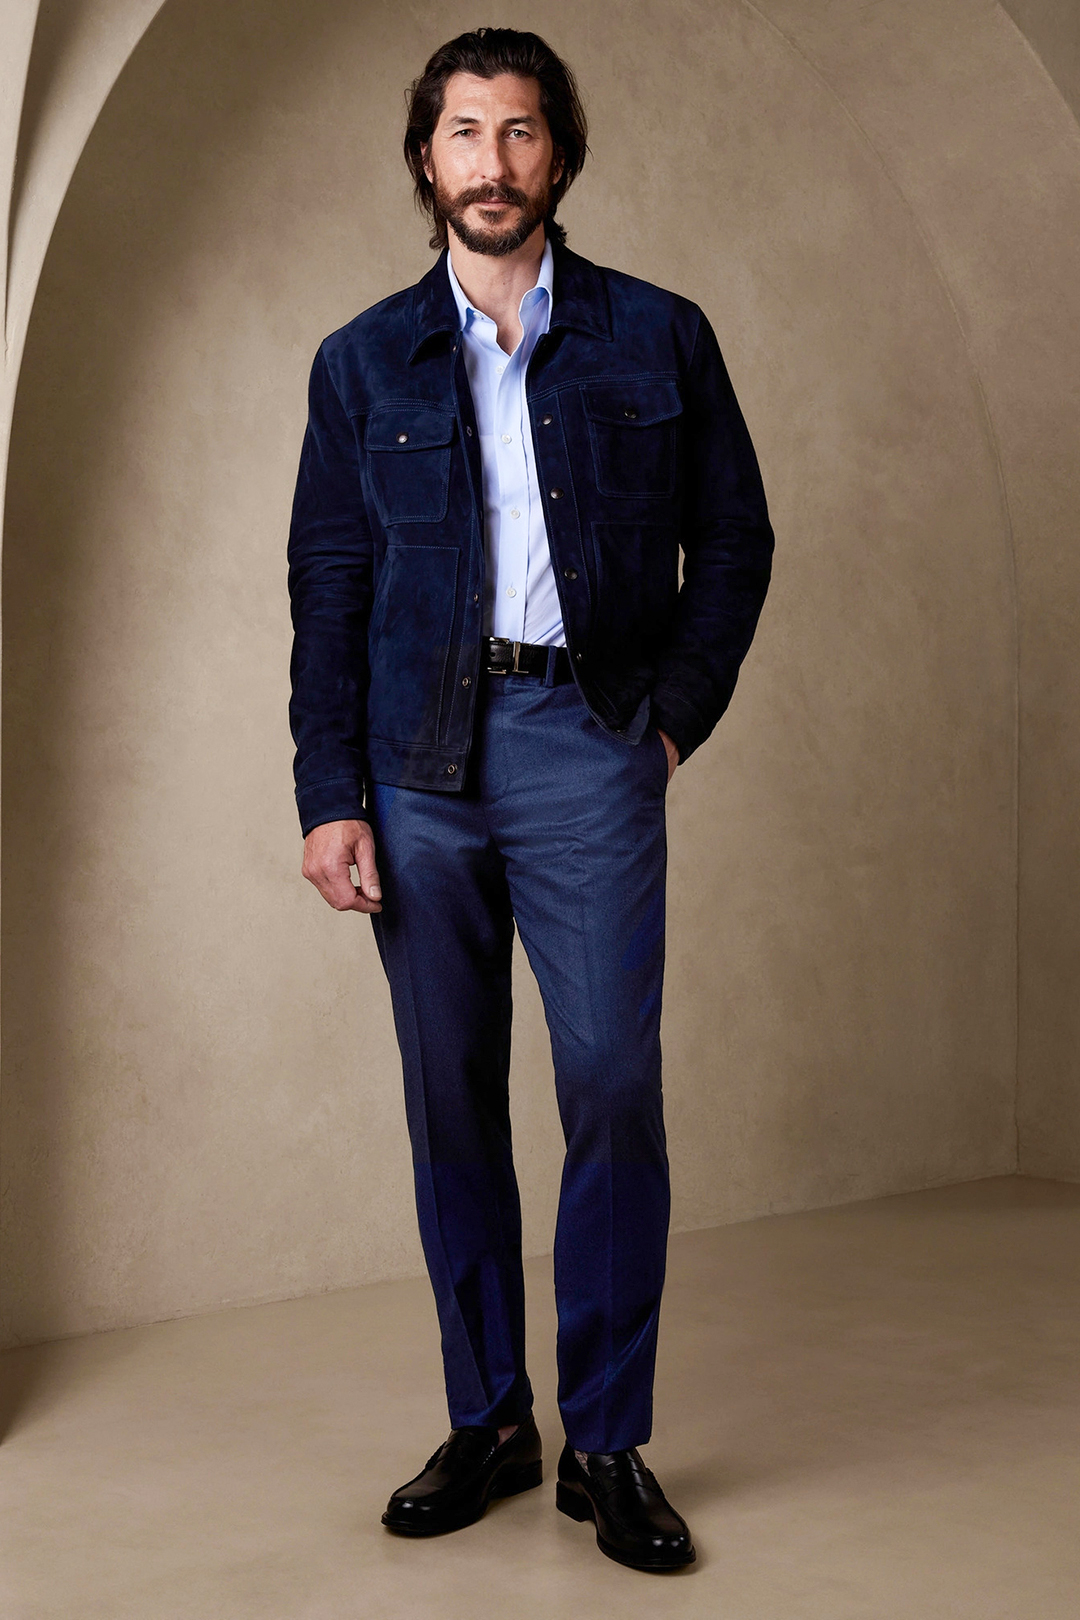 Navy trucker jacket, light blue dress shirt, navy dress pants, and black loafers outfit